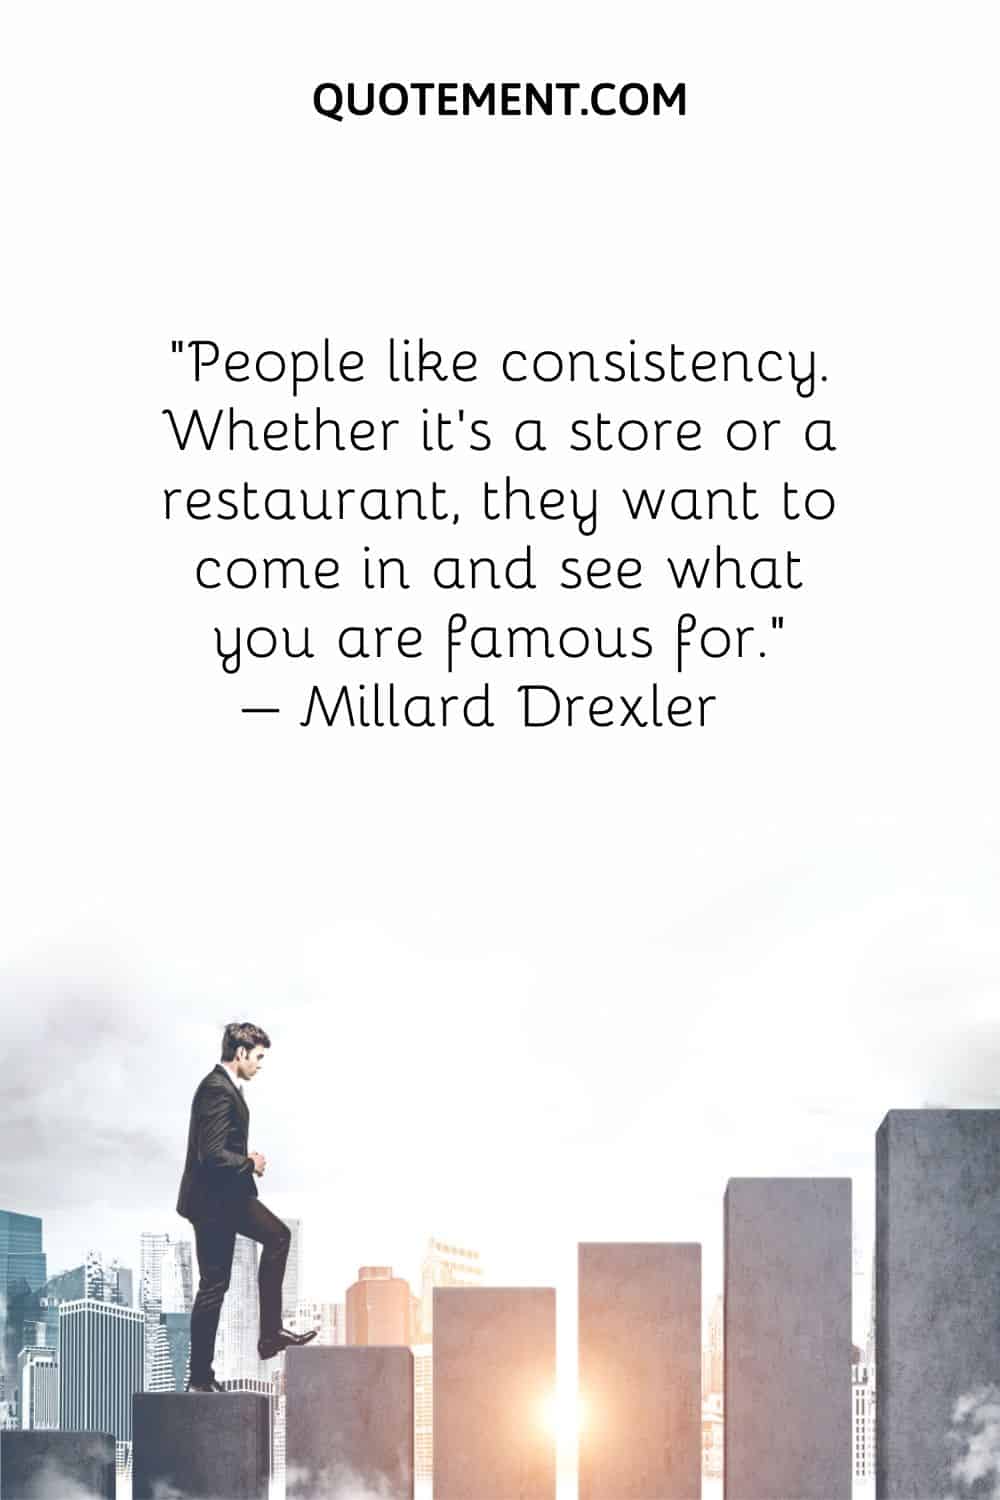 People like consistency. Whether it’s a store or a restaurant, they want to come in and see what you are famous for